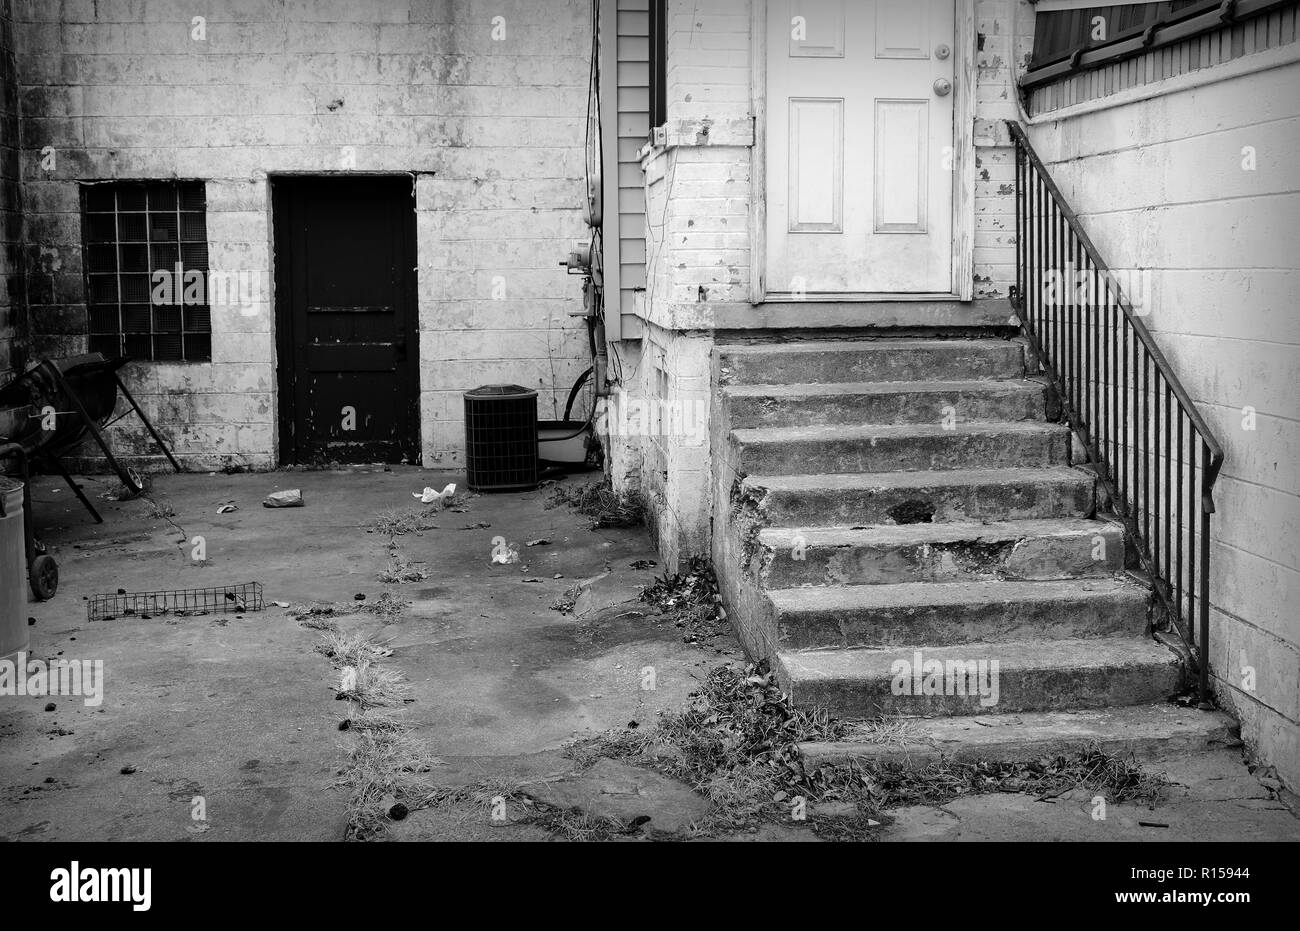 A door and stairway in an alley. Stock Photo